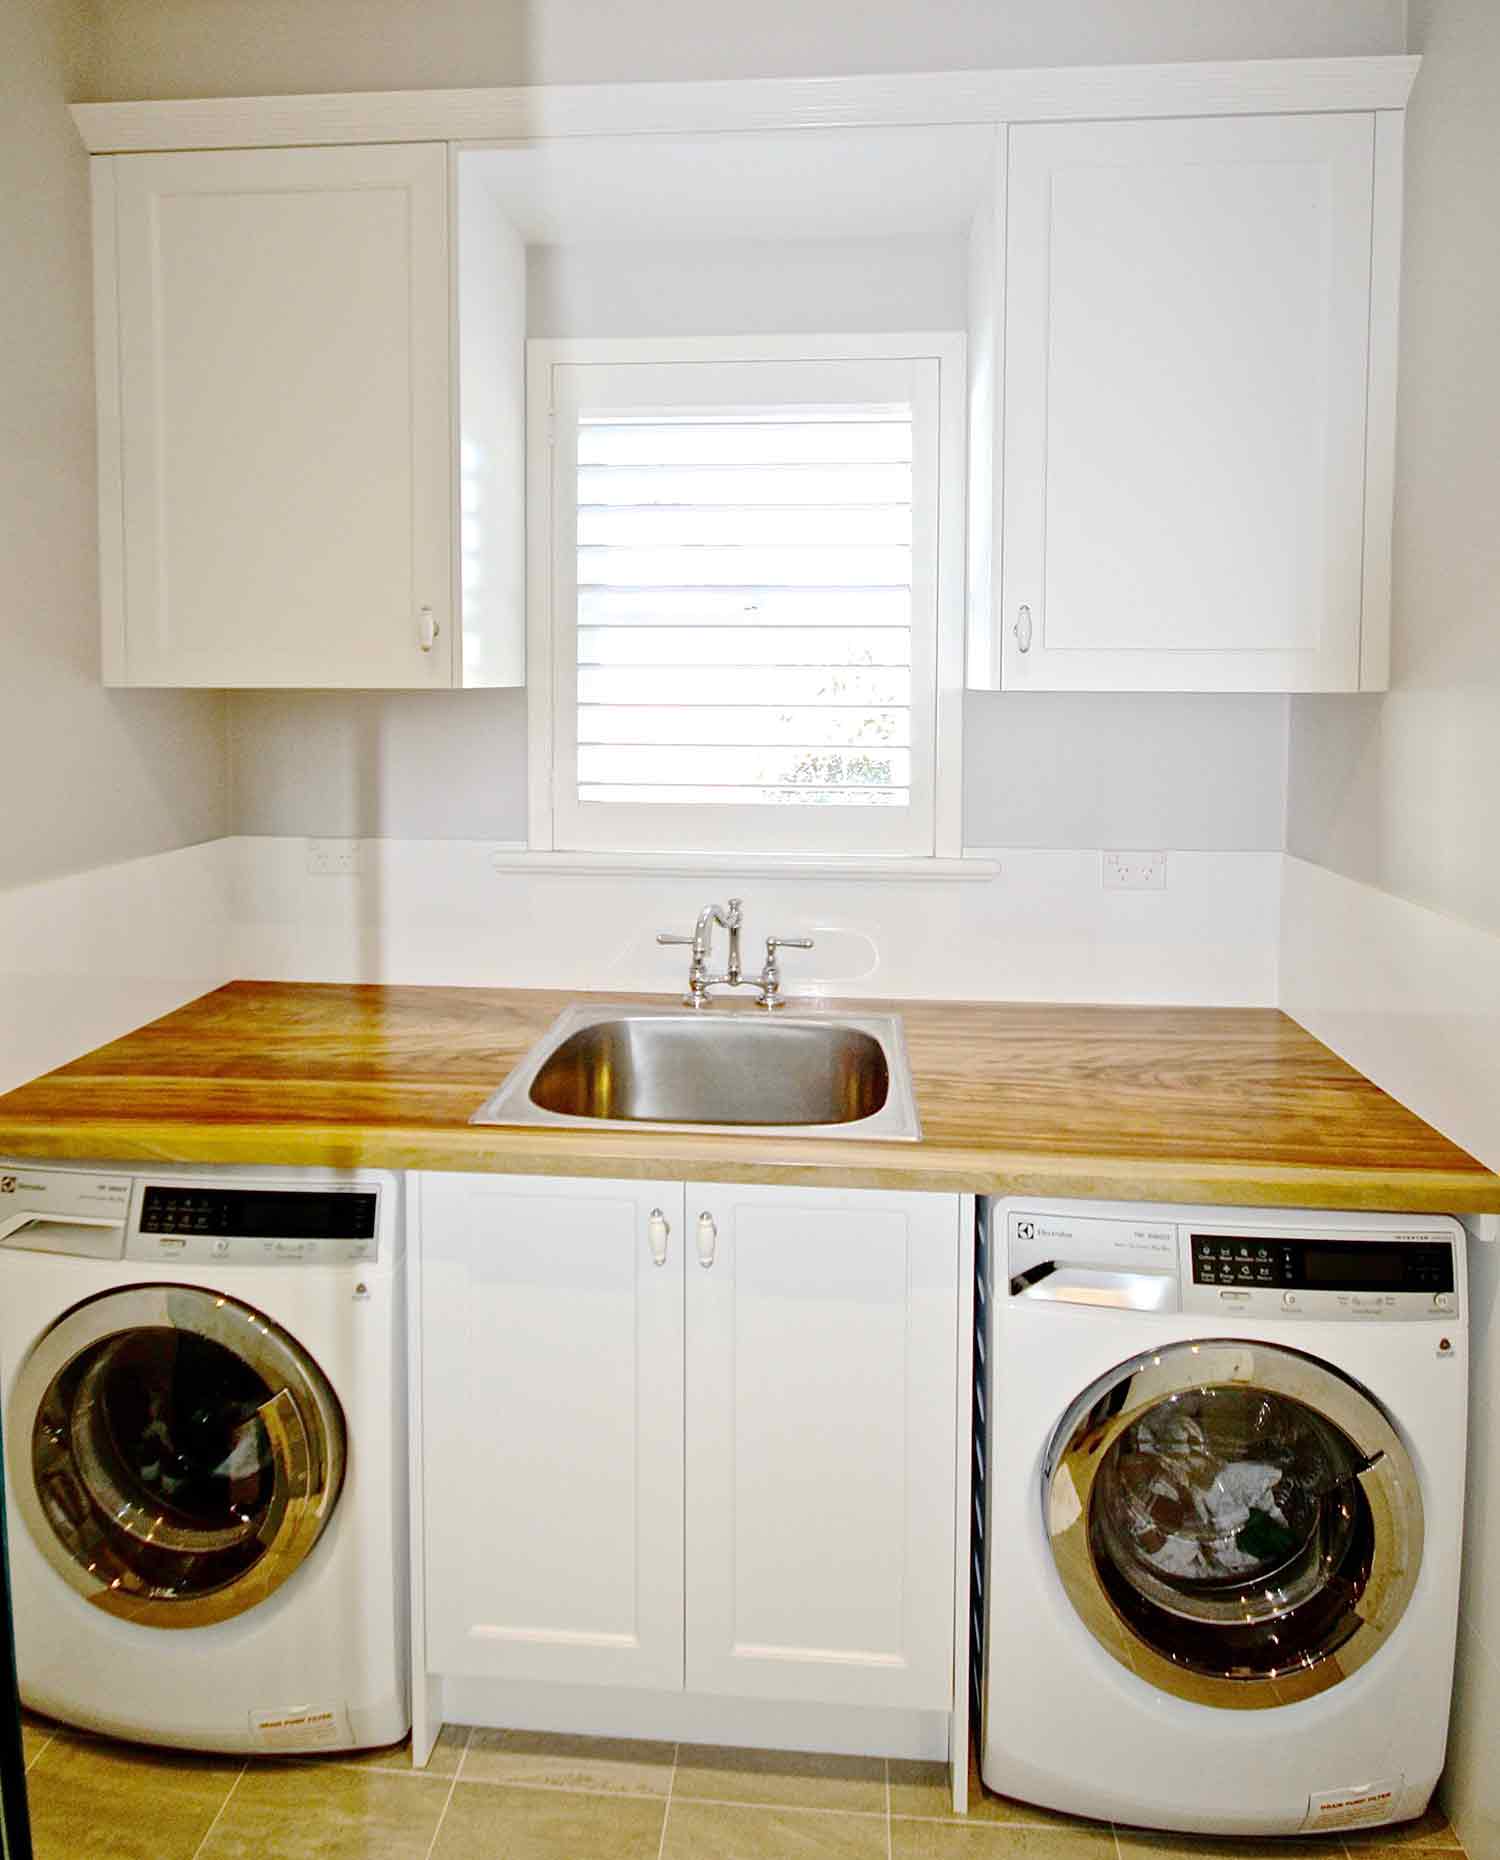 Joinery - Laundries